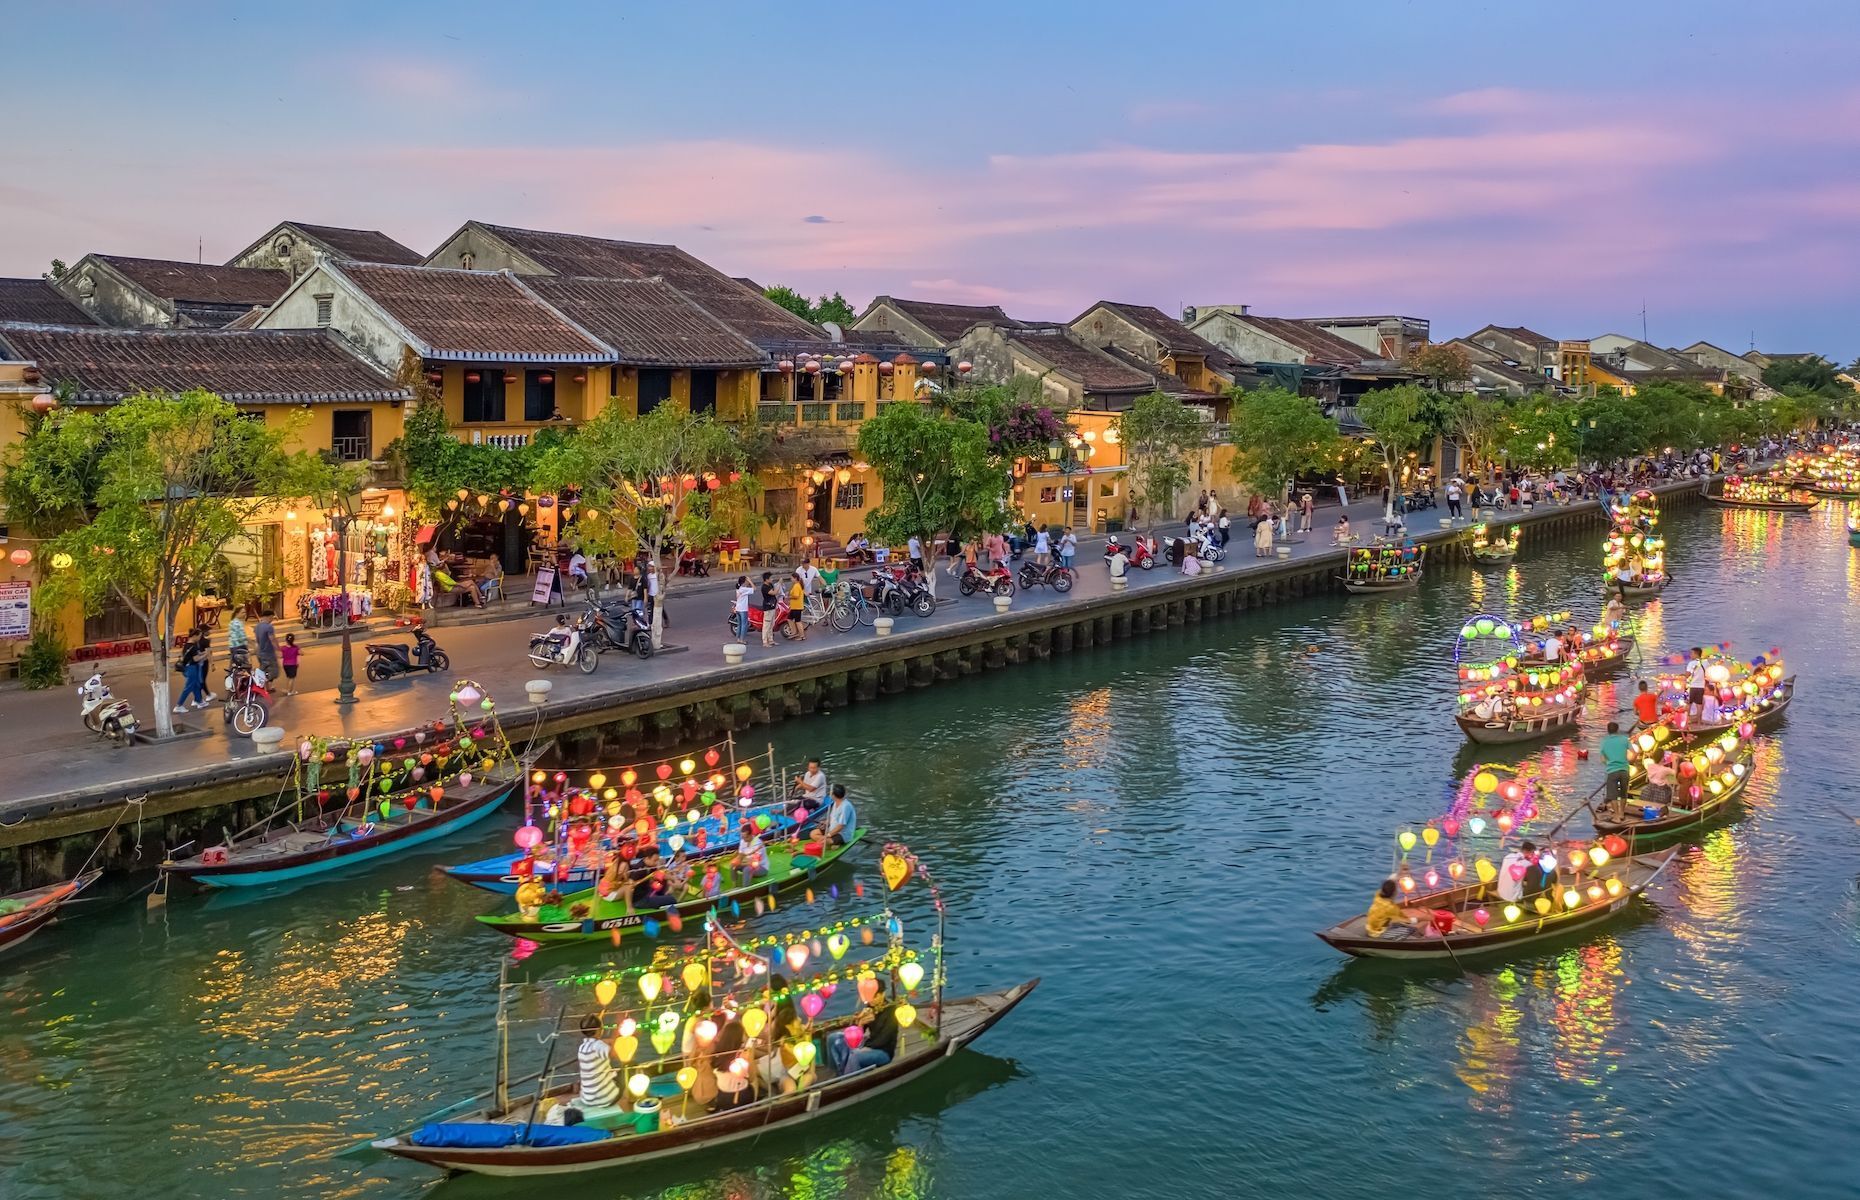 Located on Vietnam’s central coast, <a href="https://vietnam.travel/things-to-do/the-best-ways-to-explore-the-ancient-town-of-hoi-an" rel="noreferrer noopener">Hoi An</a> will immediately enchant visitors with its ancient architecture, covered bridge, and narrow streets illuminated at night by colourful lanterns. The area is famous as a former trading port on the Silk Road and is home to many talented tailors ready to create high-quality bespoke garments. Plan your stay between February and May to make the most of its historical district and local markets. Plus, take a bike tour through the surrounding rice paddies.